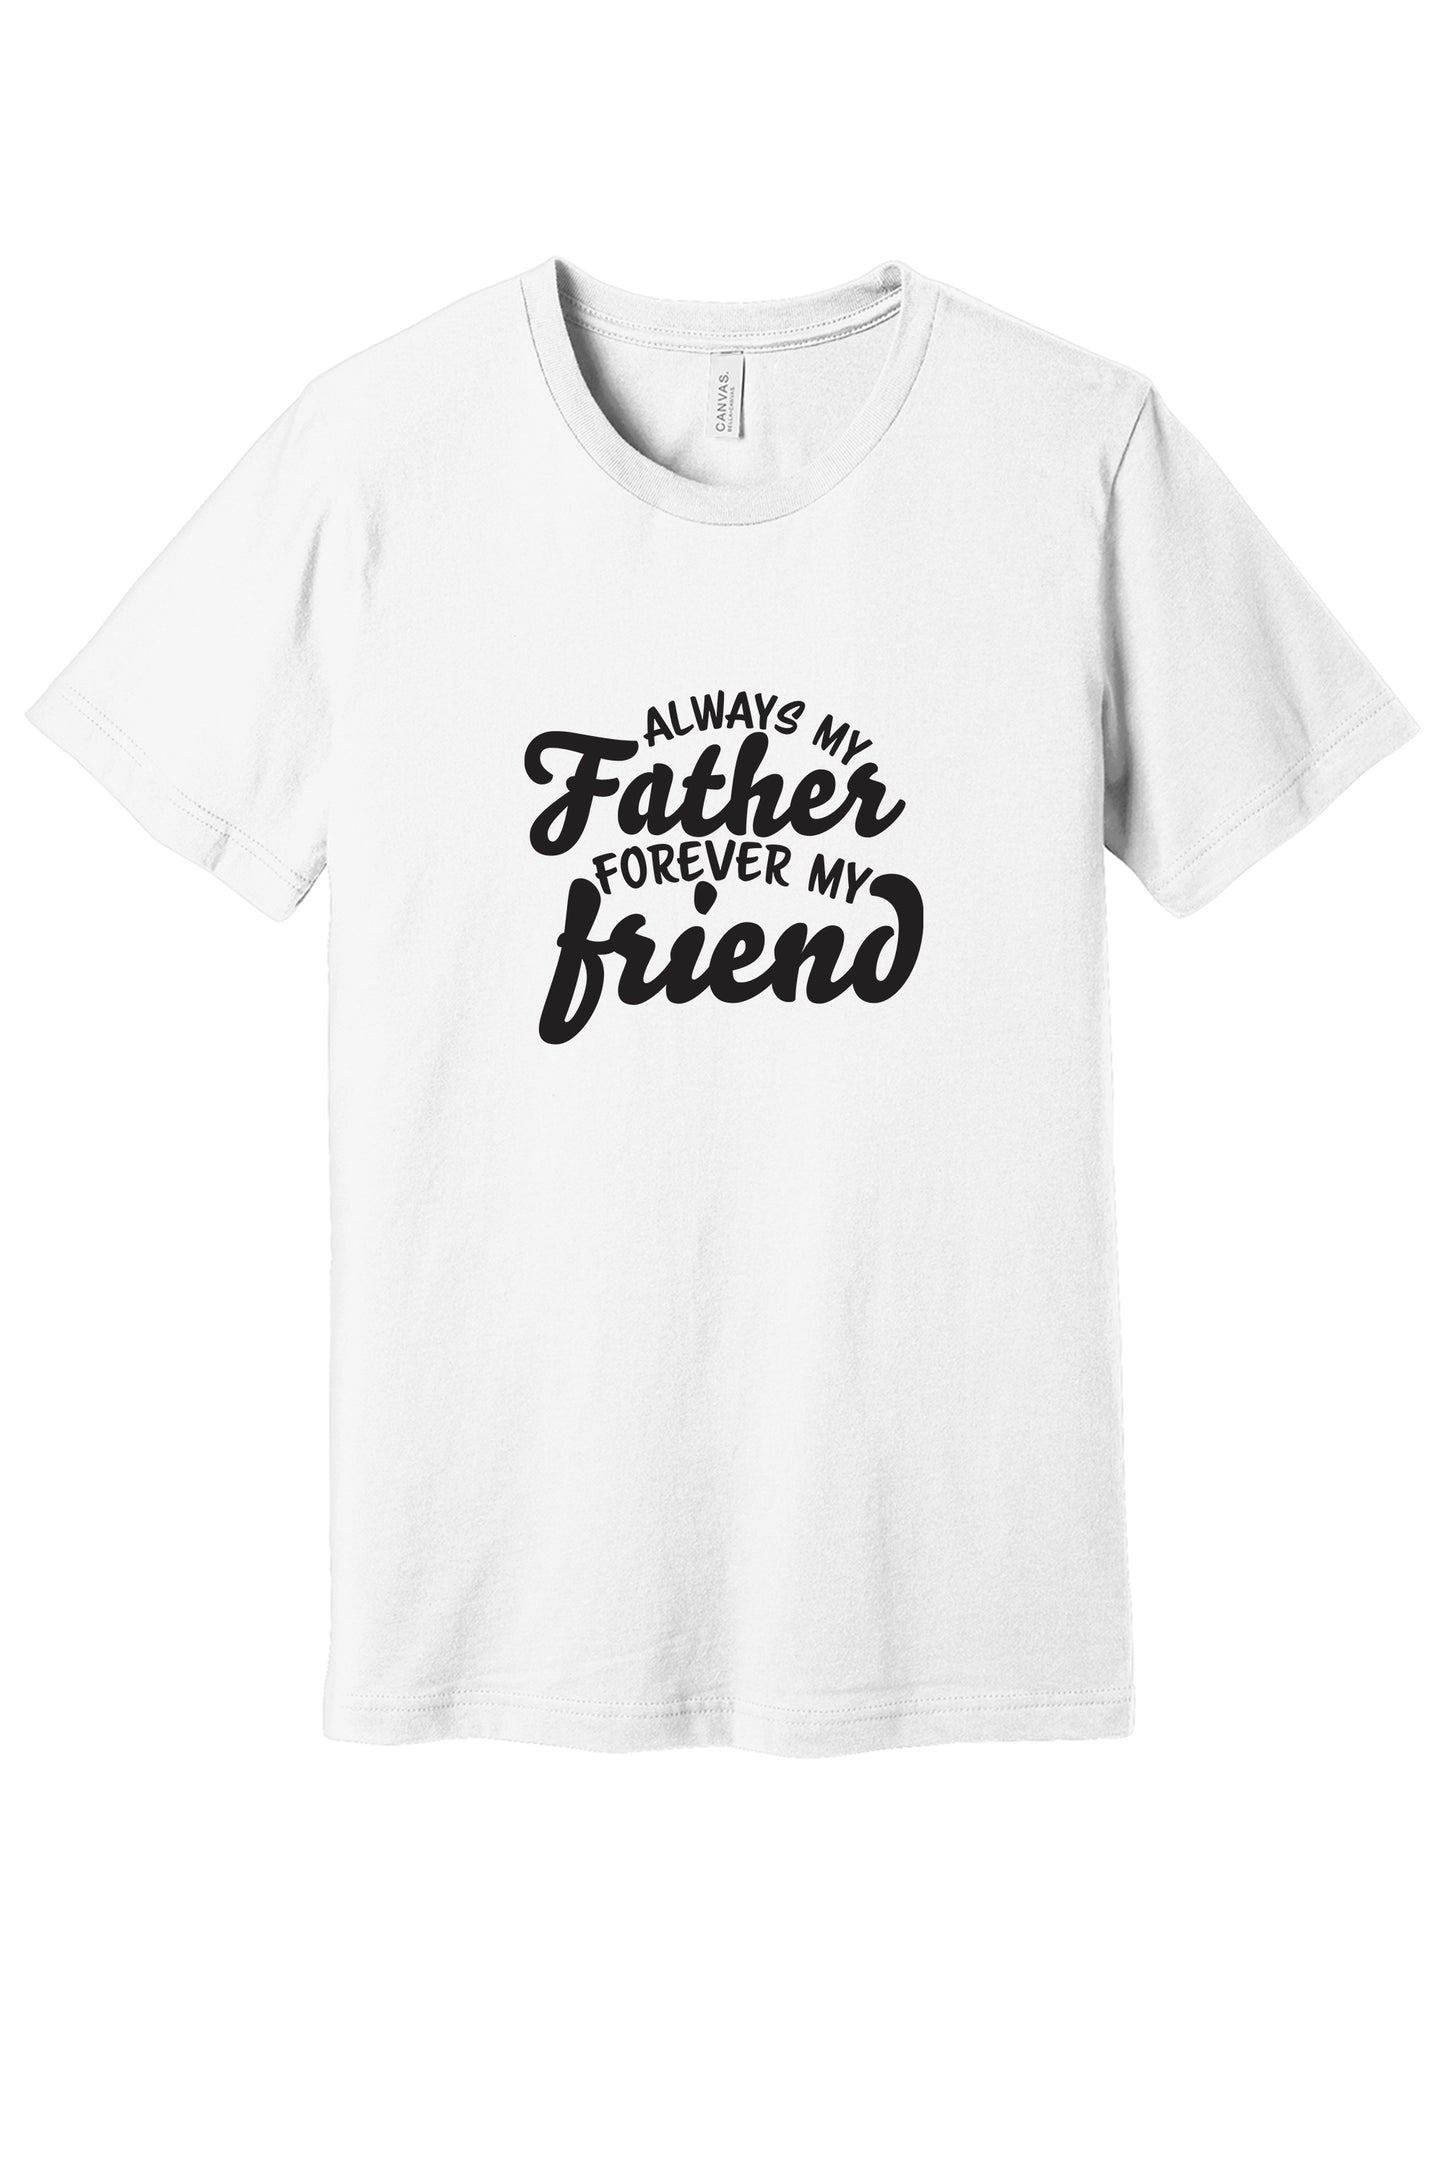 Always my Father forever my Friend Unisex Jersey Long Sleeve Tee